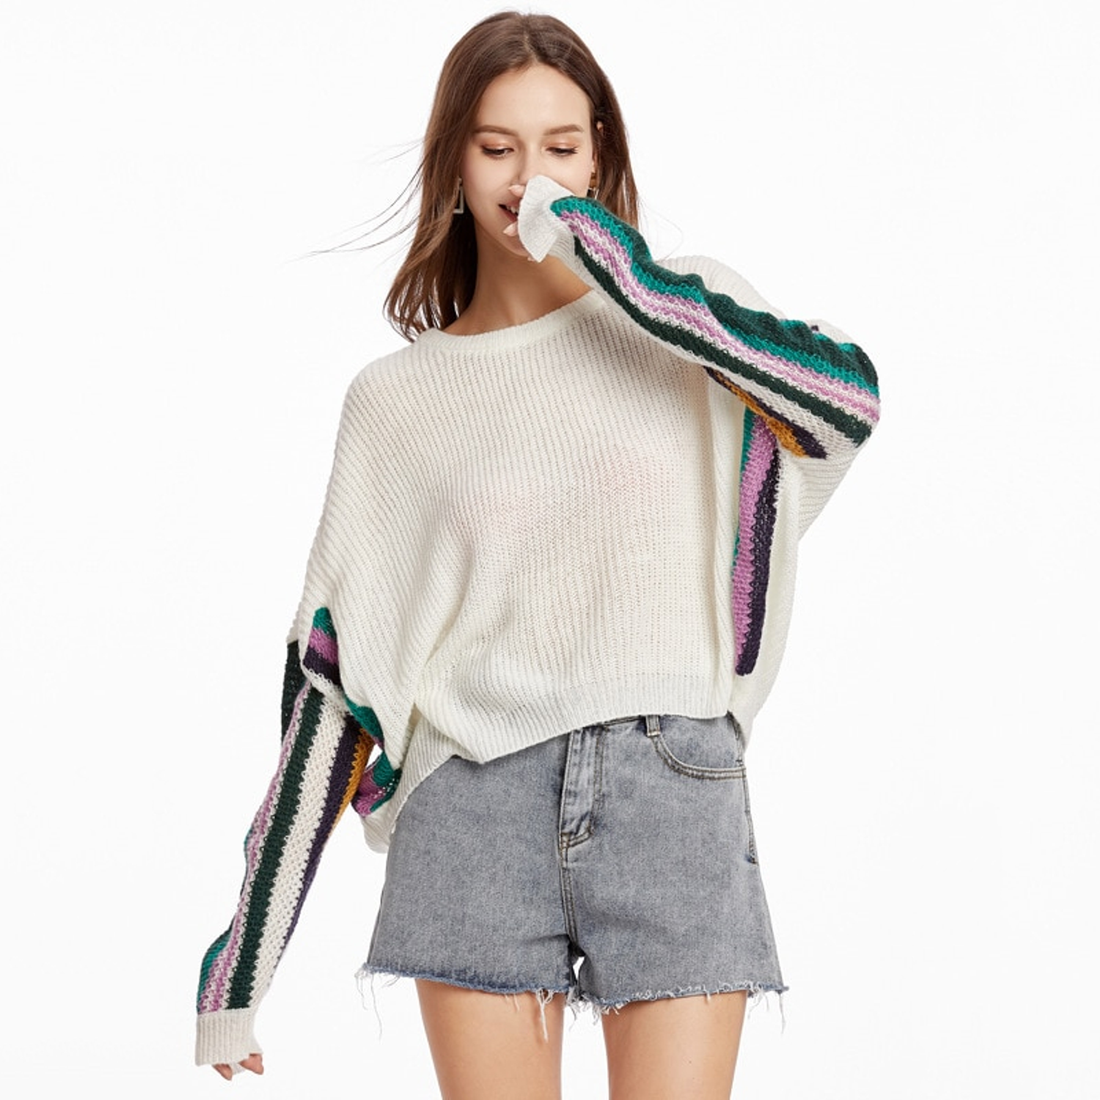 Women's Autumn/Winter Casual Loose Knitted Sweater